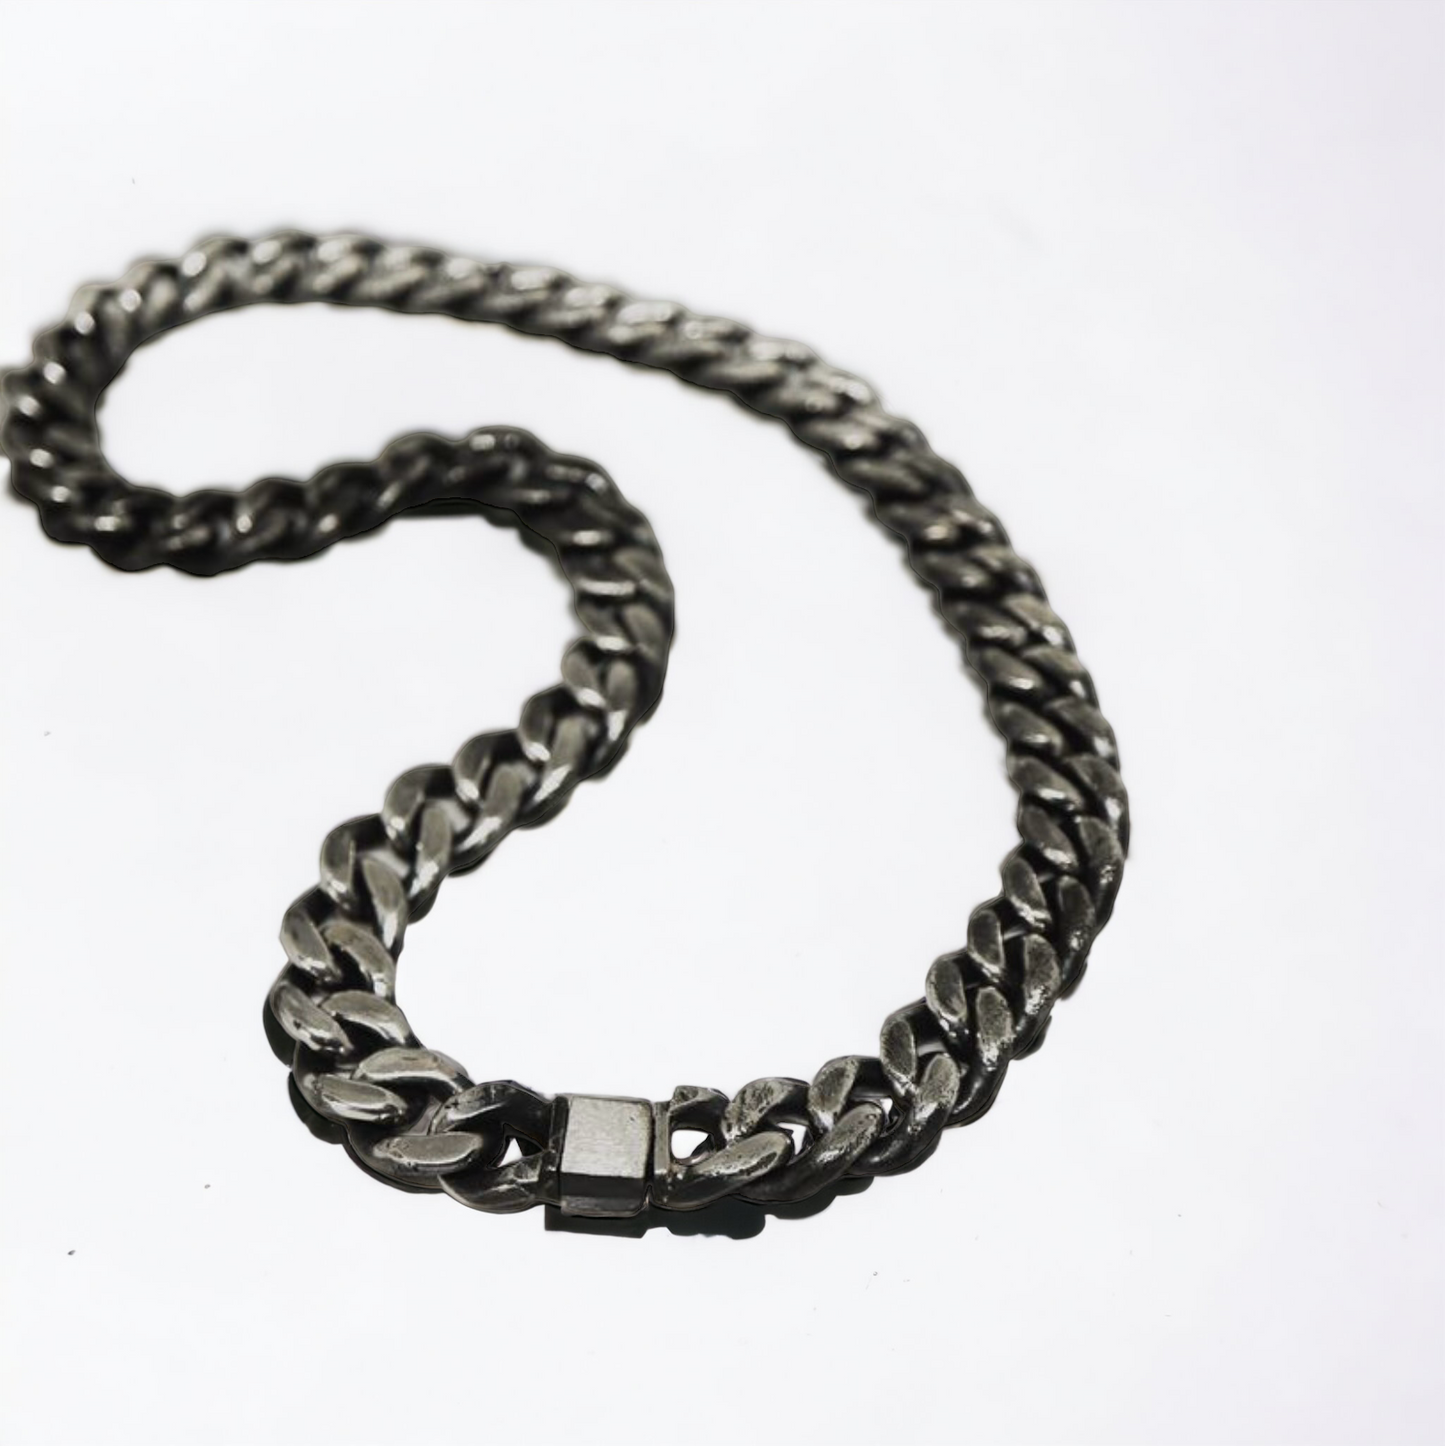 10mm Patinated/Oxidized Sterling Silver Cuban Chain